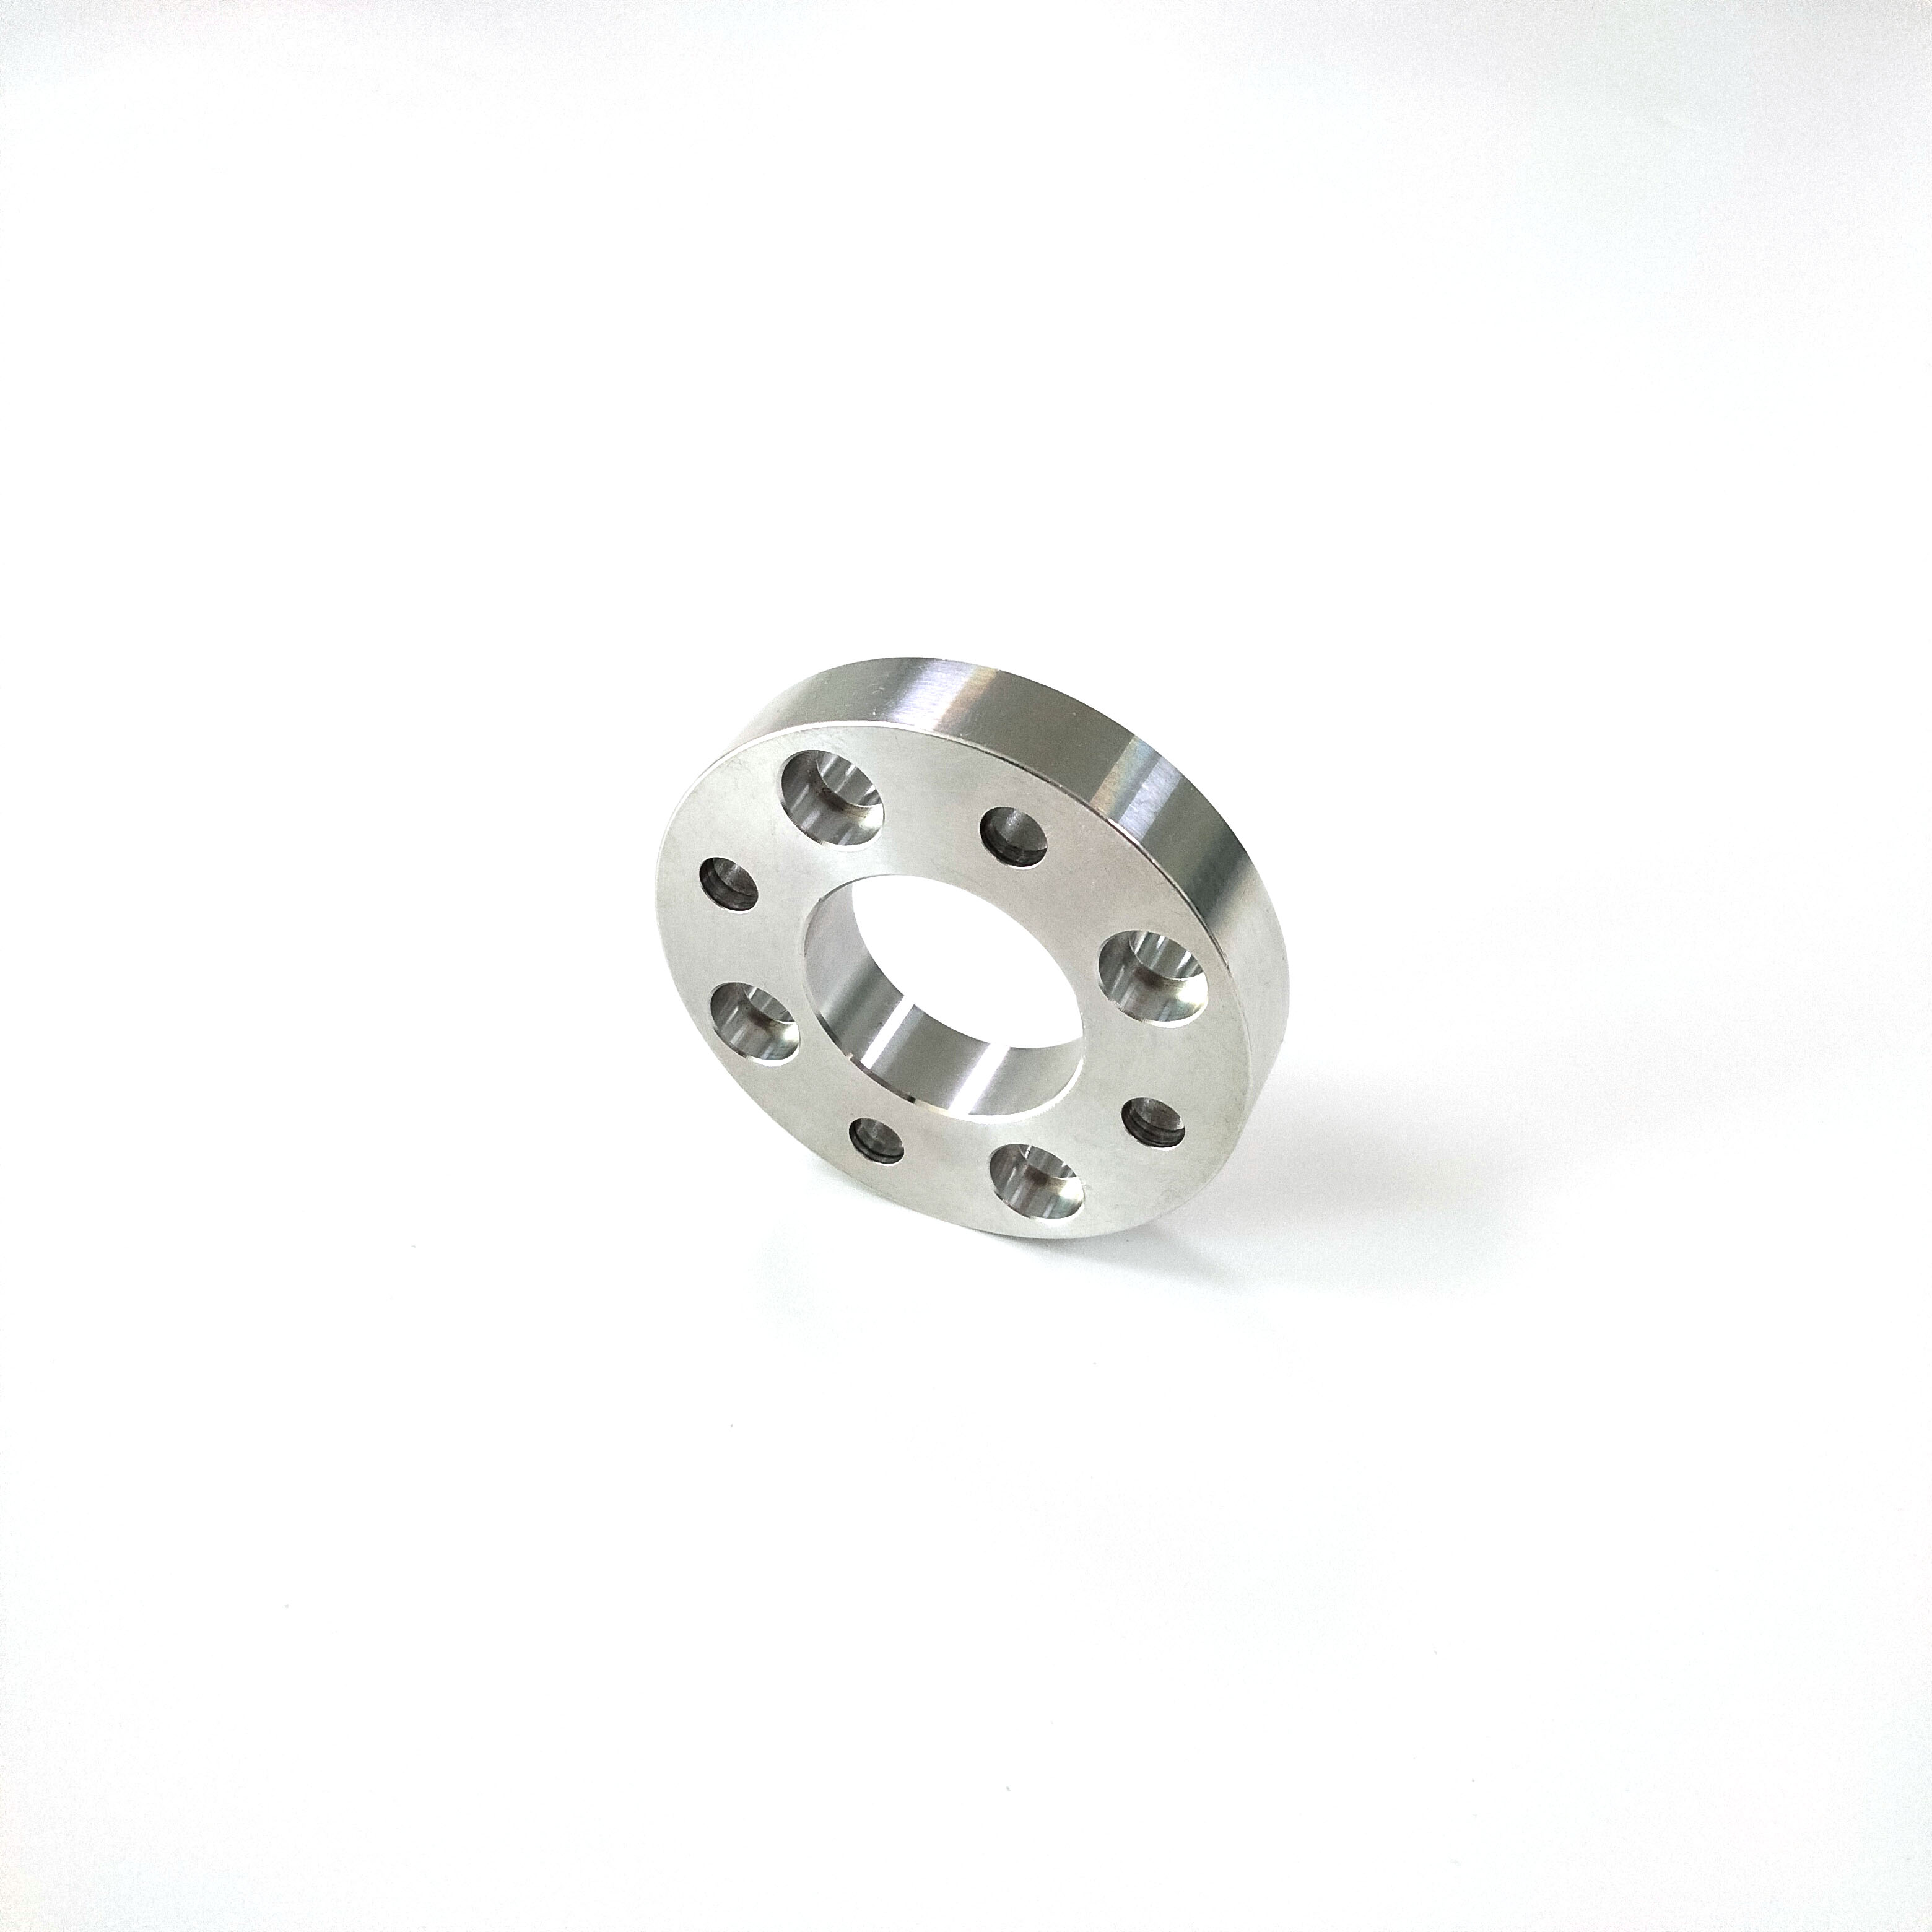 Stainless Steel Pin Couplings CNC Machining Factory Chengshuo Hardware By Mia & Corlee